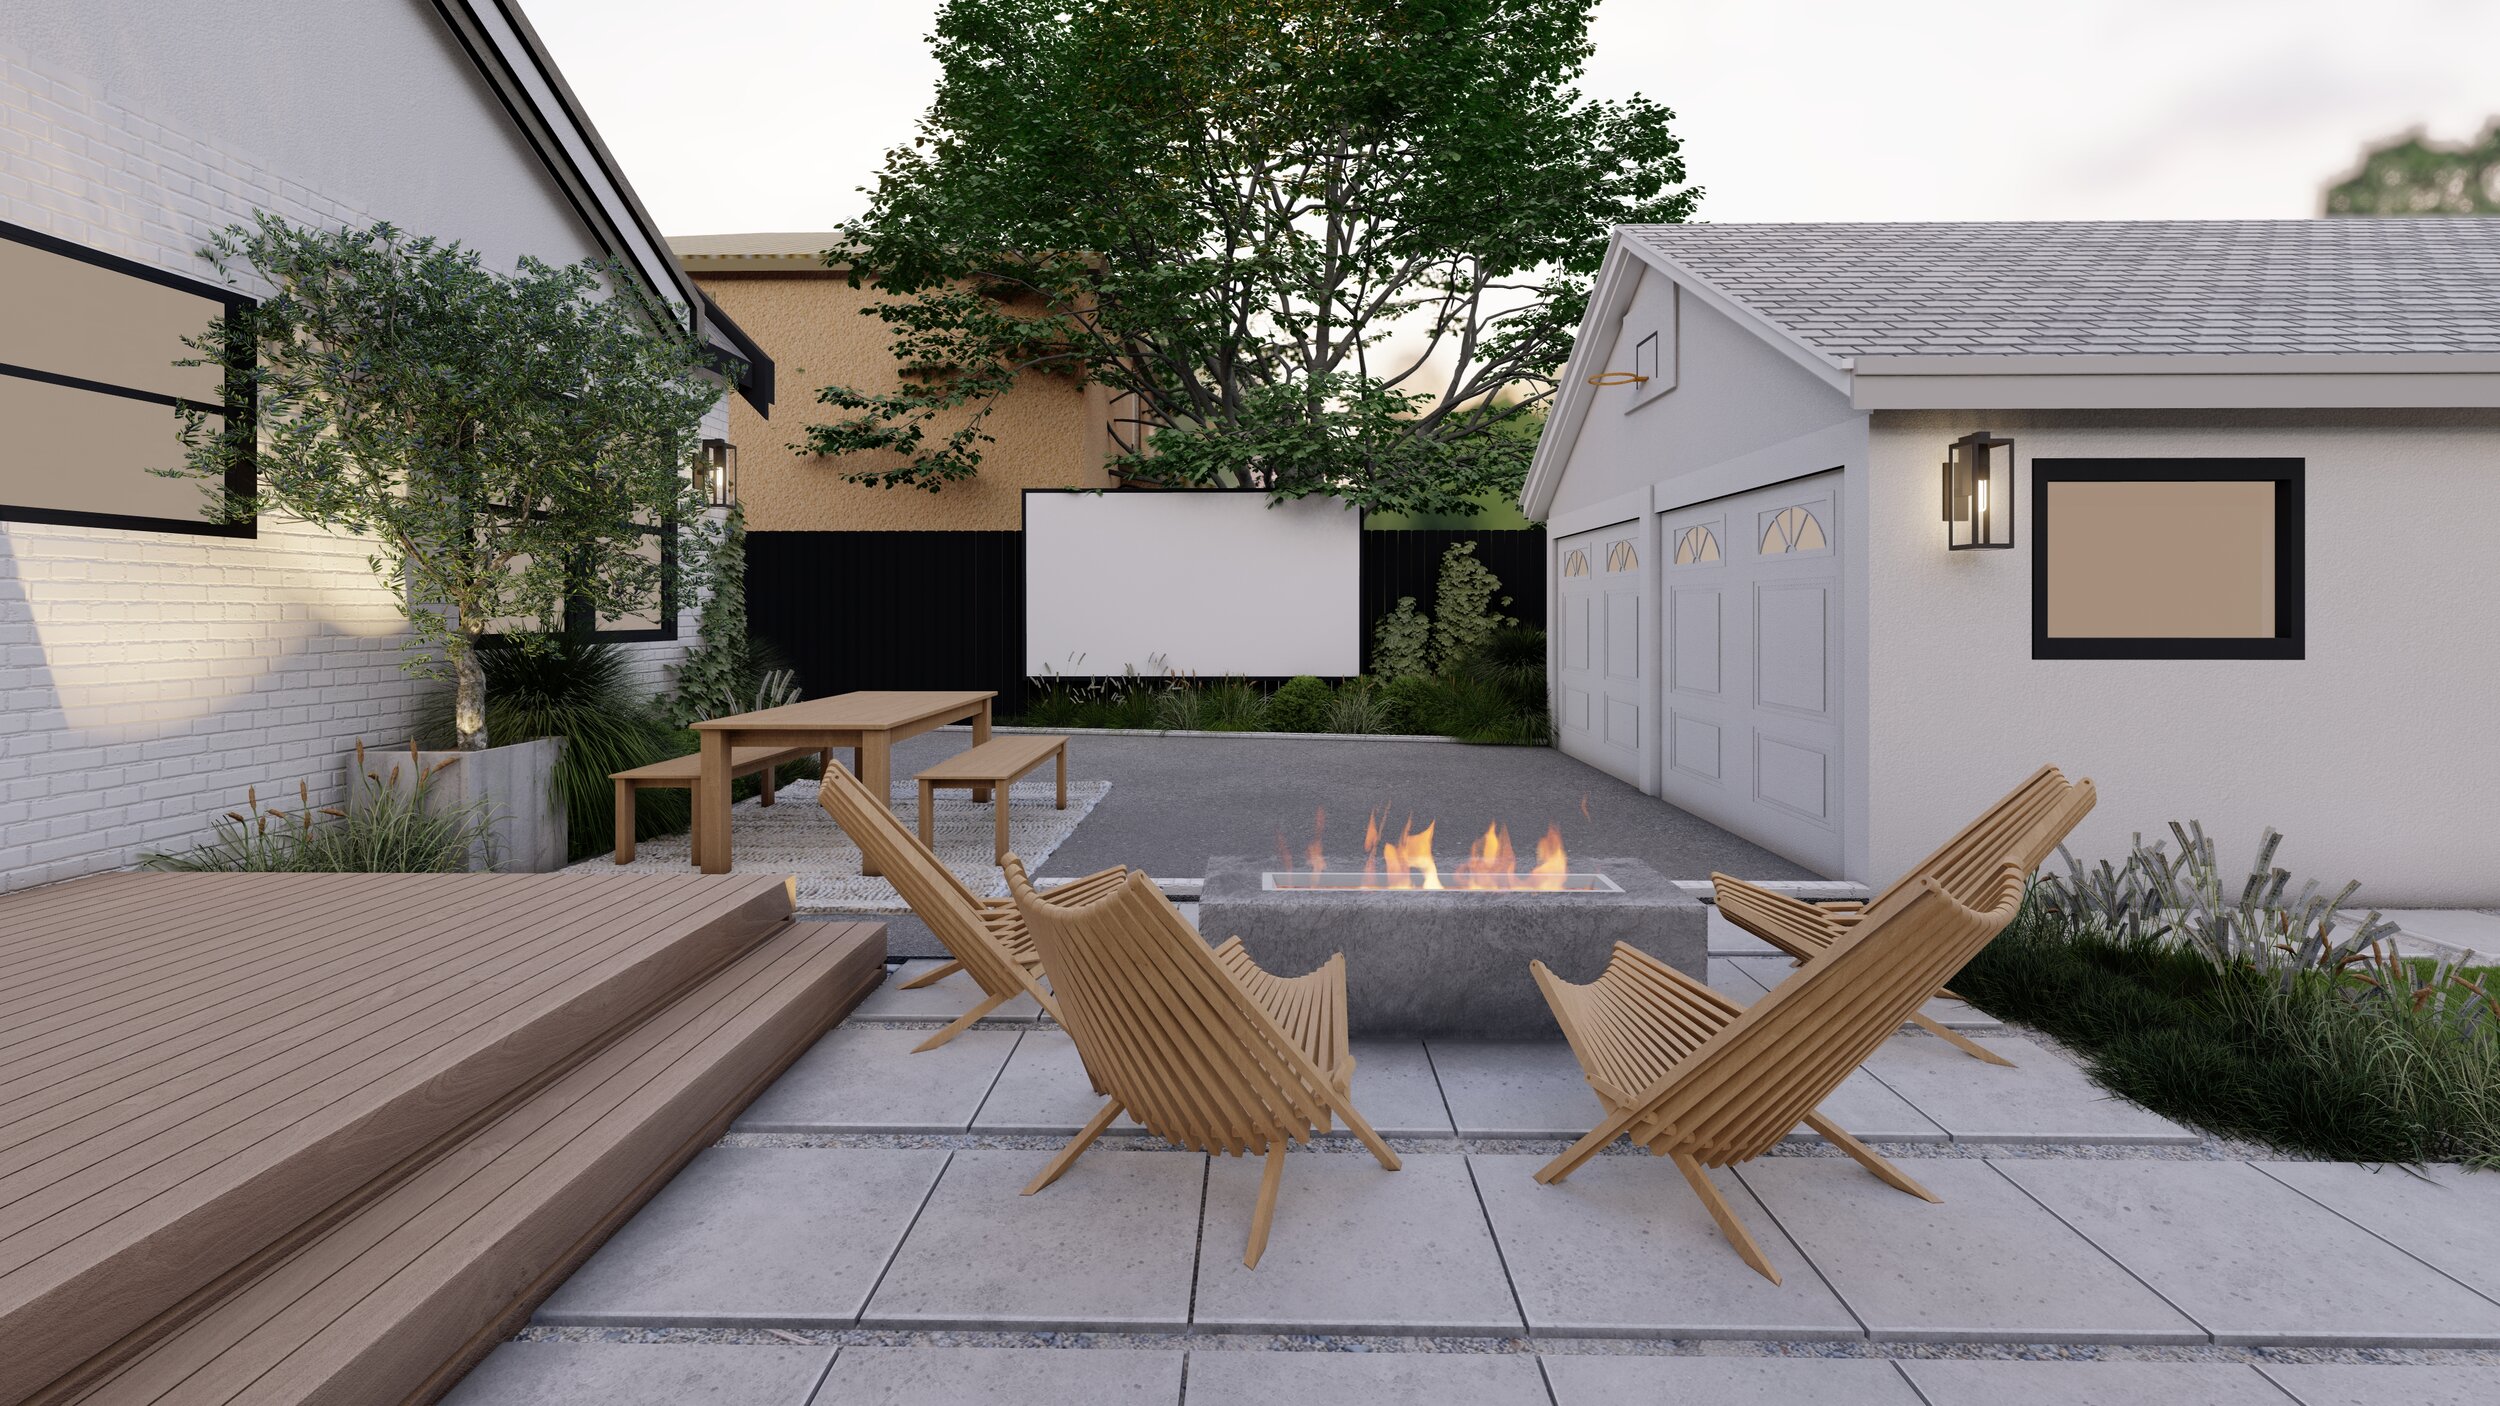 Backyard view of modern farmhouse with deck and chairs around a rectangular fire pit near a garage with outdoor movie screen